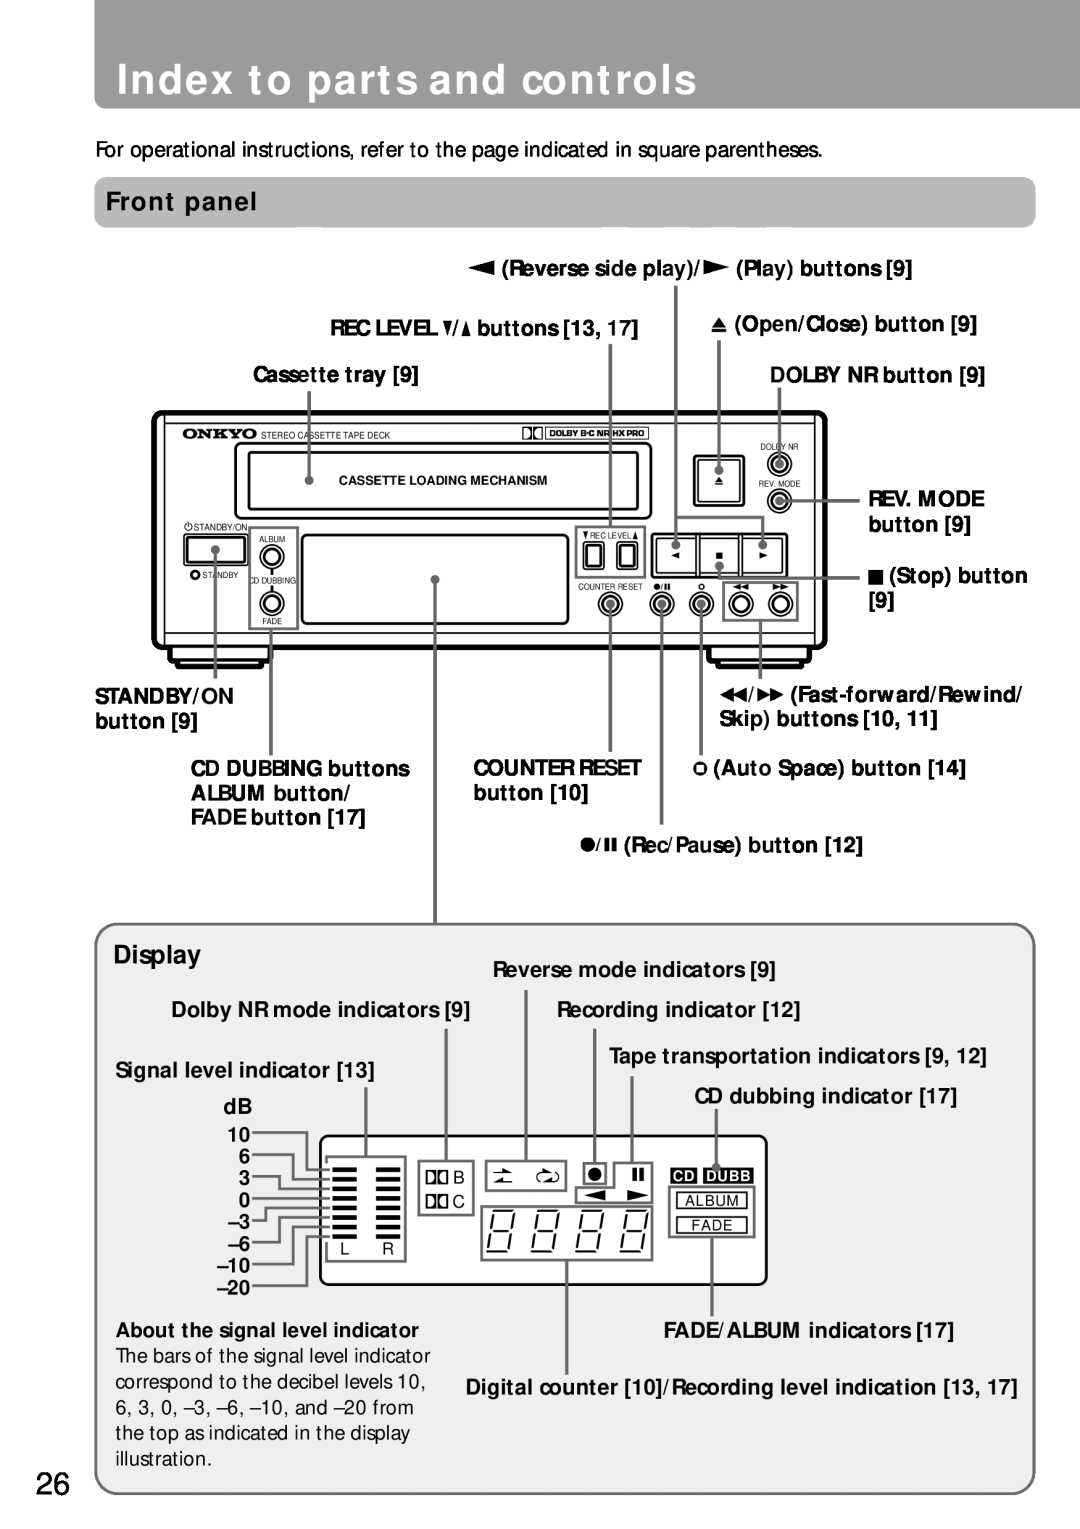 Onkyo K-505TX instruction manual Index to parts and controls, Front panel, Display 